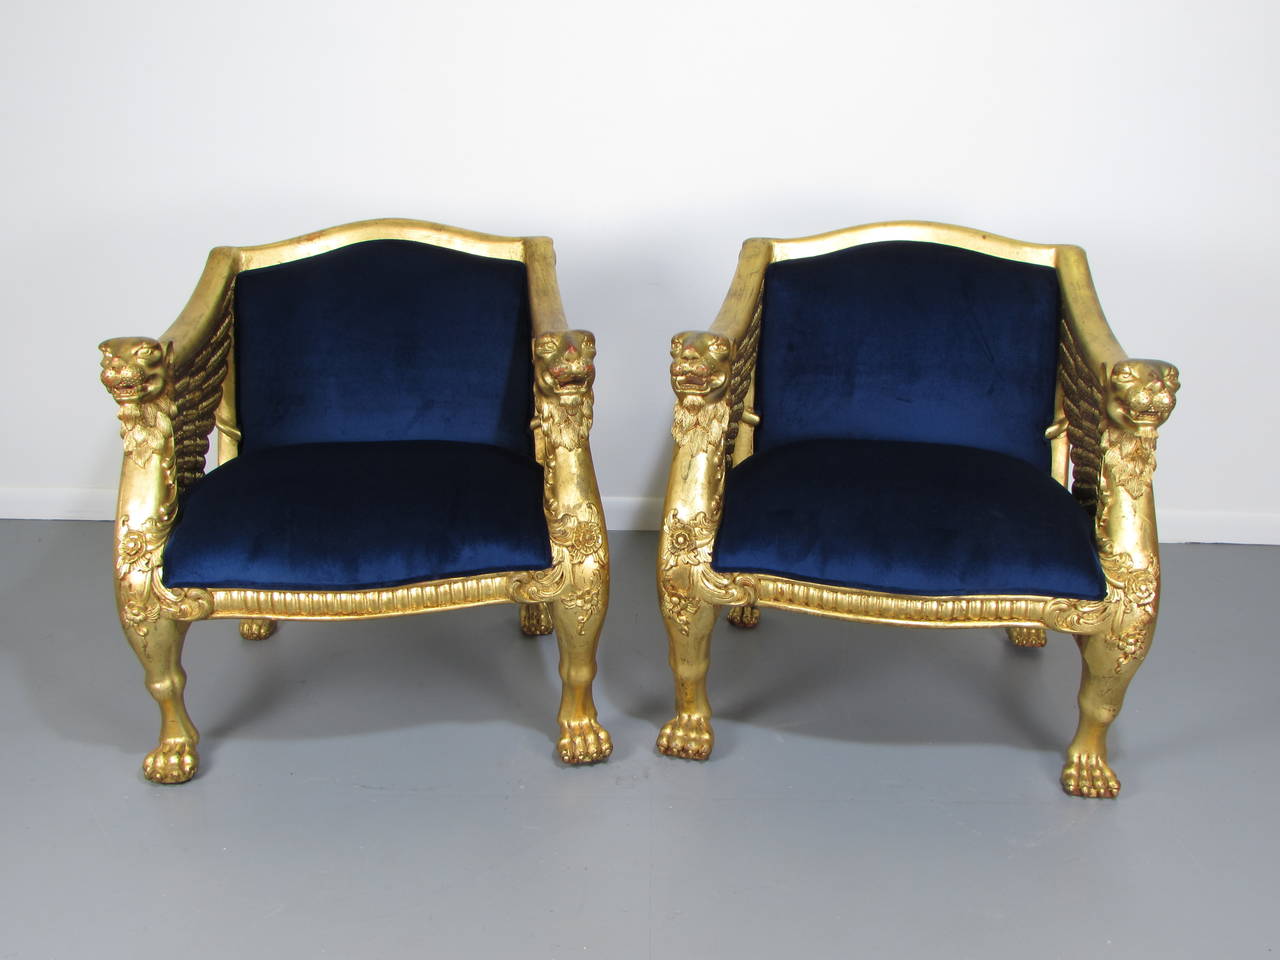 Extravagant 19th Century French Winged-Lion Giltwood Empire Throne Bergeres. Chairs were purchased in Paris in the 1950s at an antique market then privately imported to the US. Upholstery is new. The gilt wood frames have been left in vintage